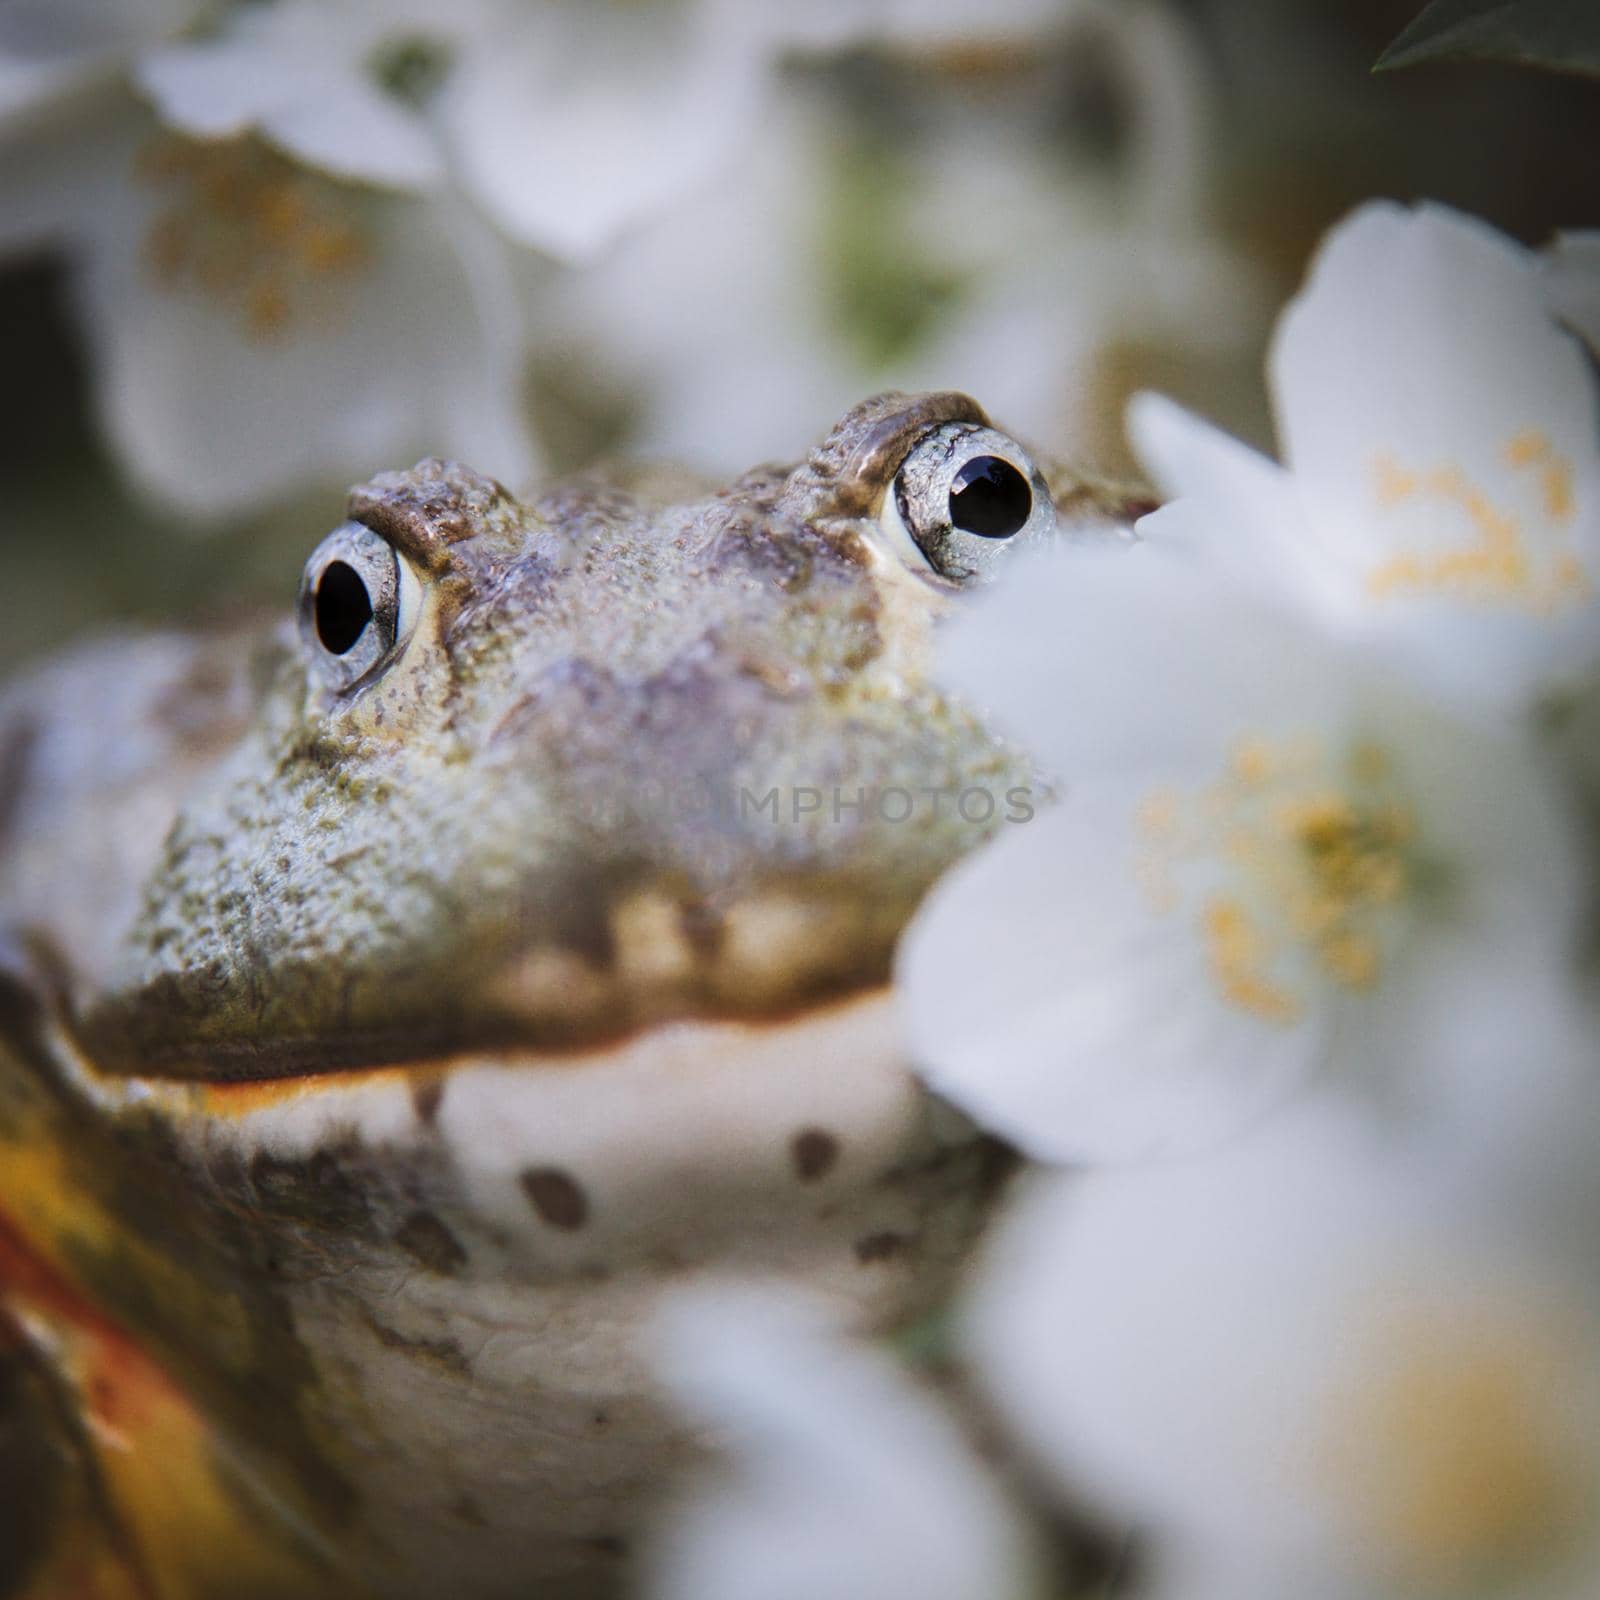 The African bullfrog, adult male with philadelphus flower bush by RosaJay